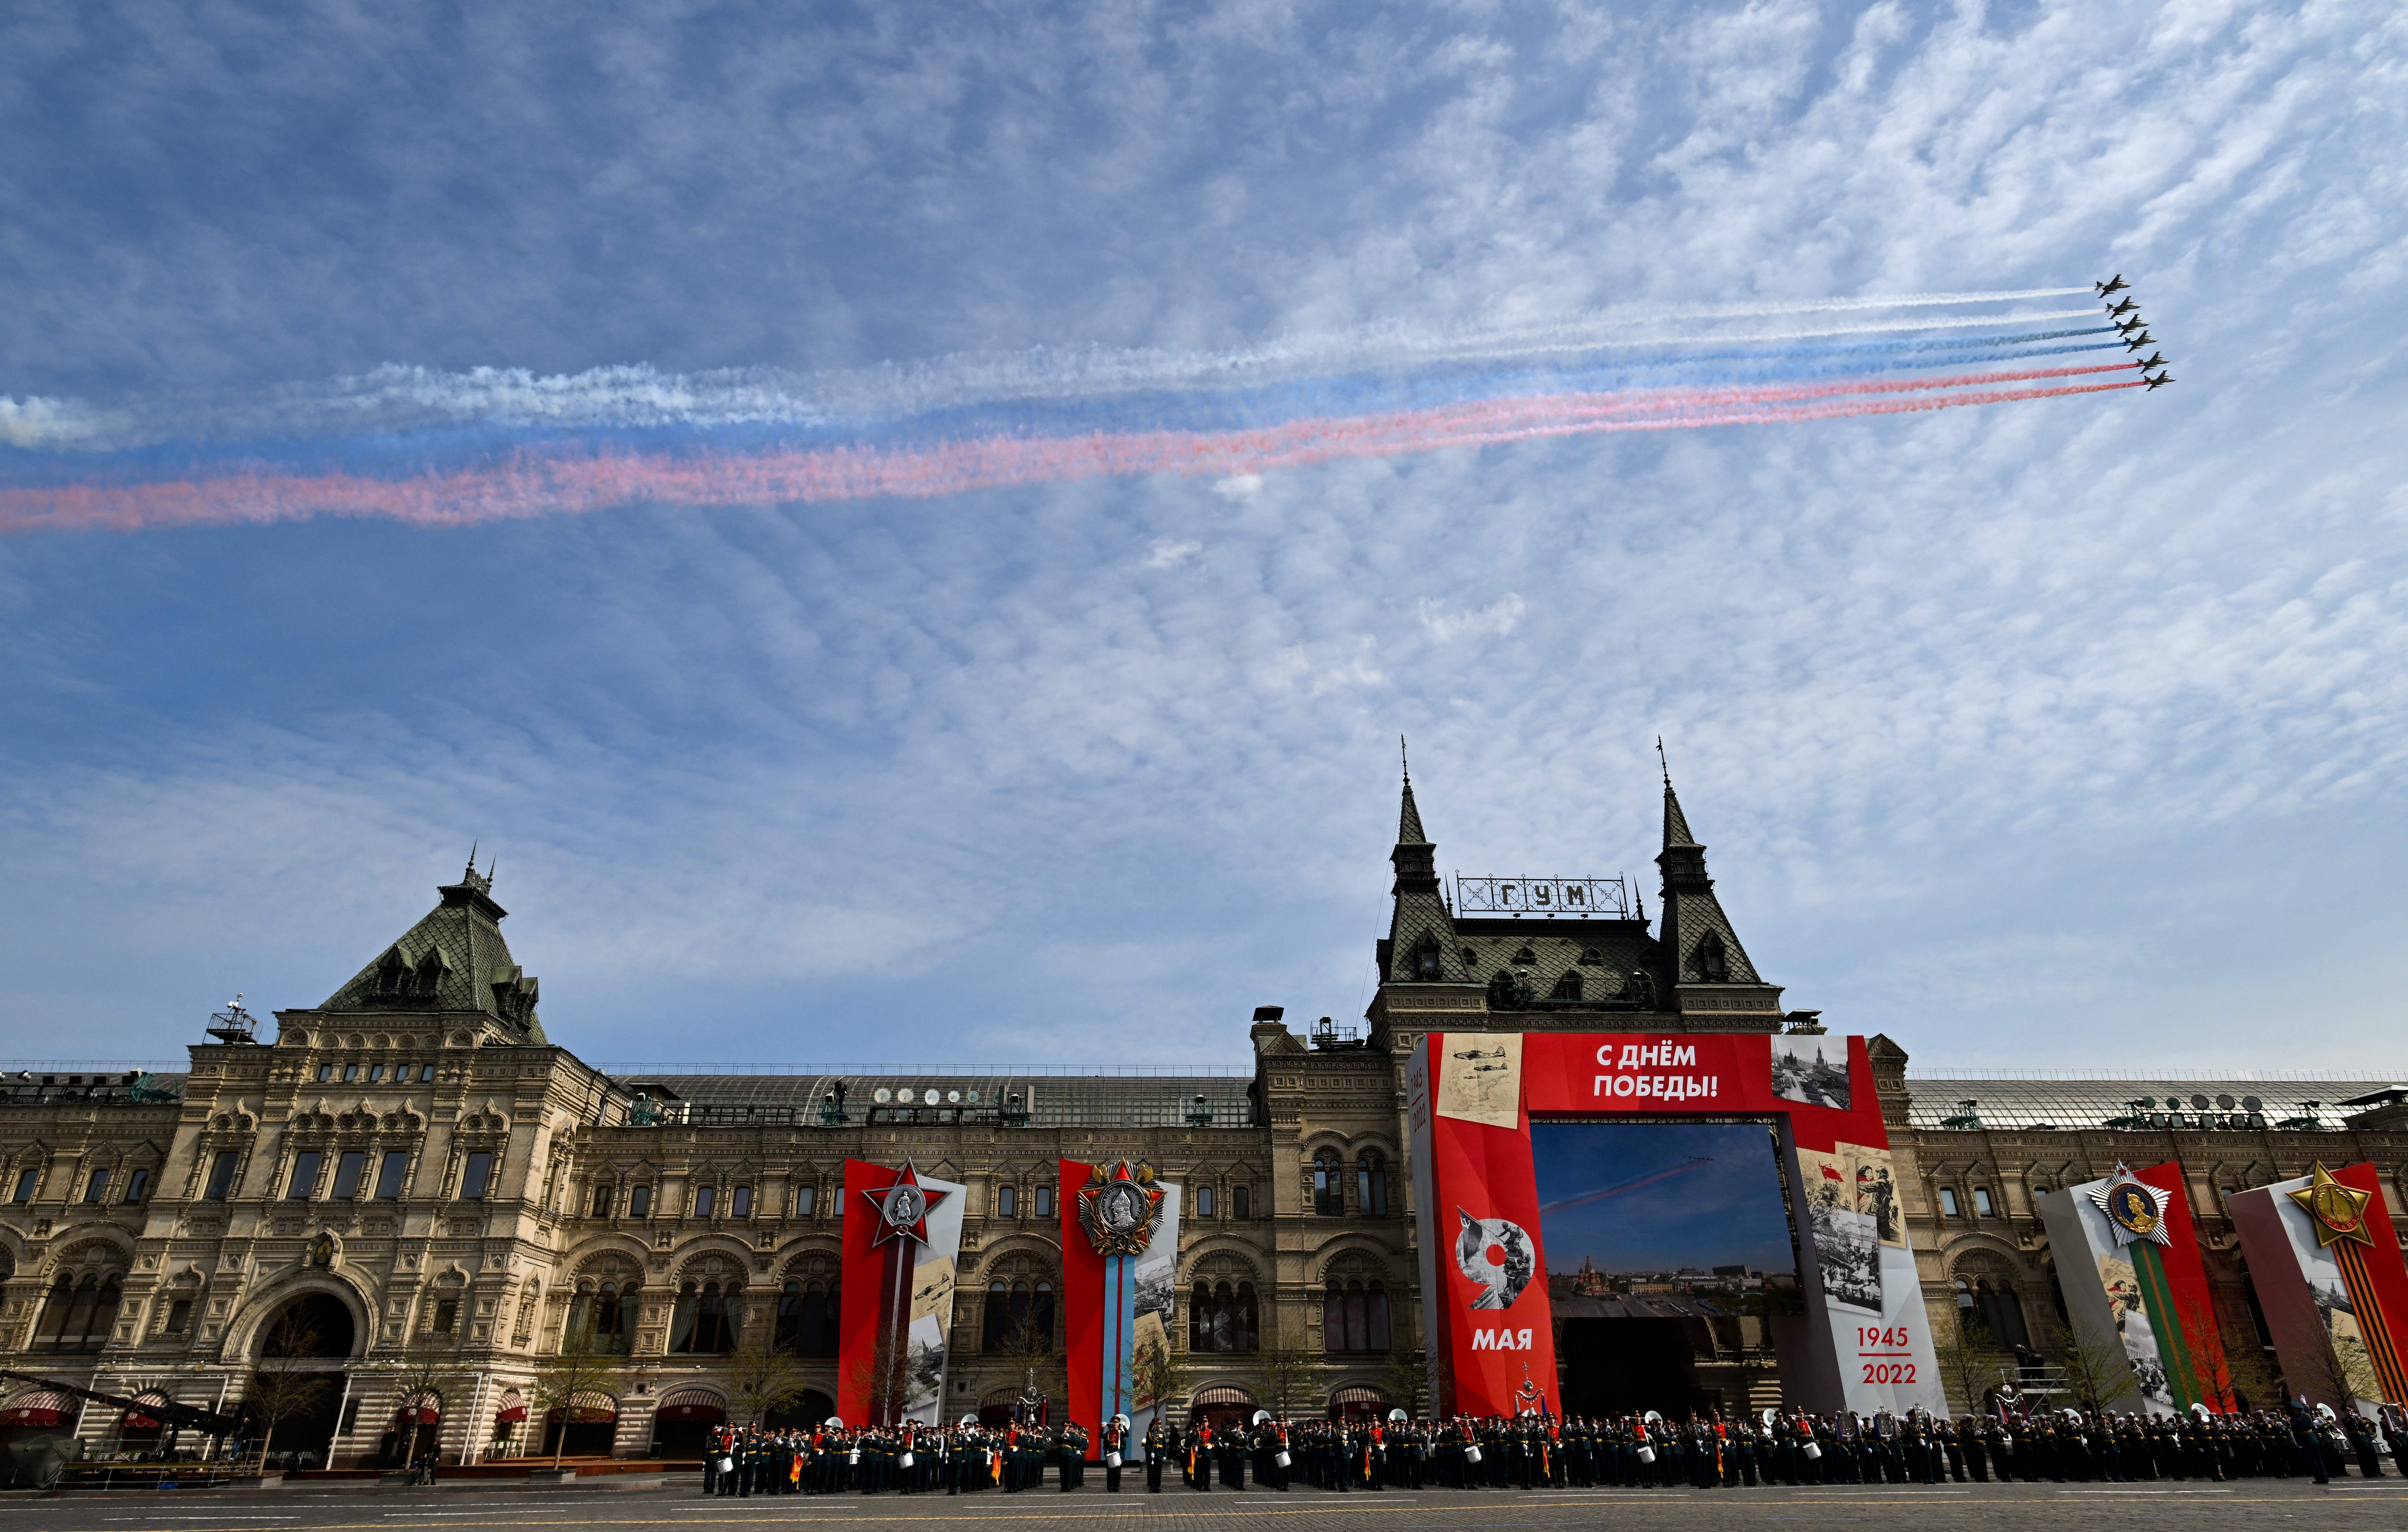  Russian jets flying over Red Square during the general rehearsal of the Victory Day military parade in central Moscow on May 7.